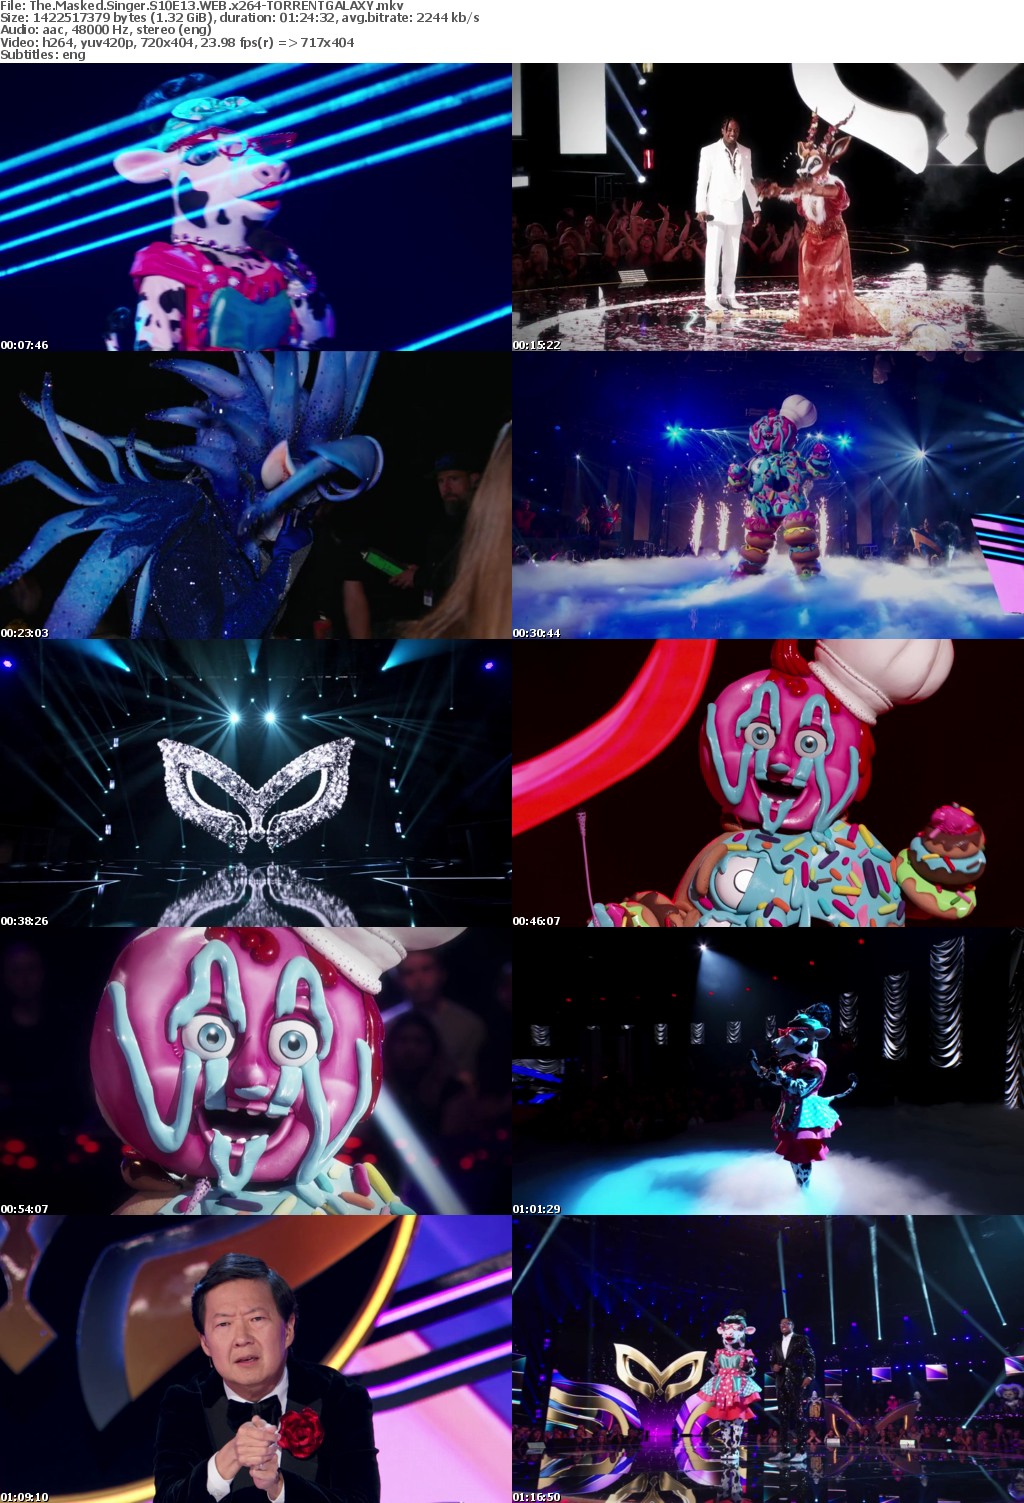 The Masked Singer S10E13 WEB x264-GALAXY